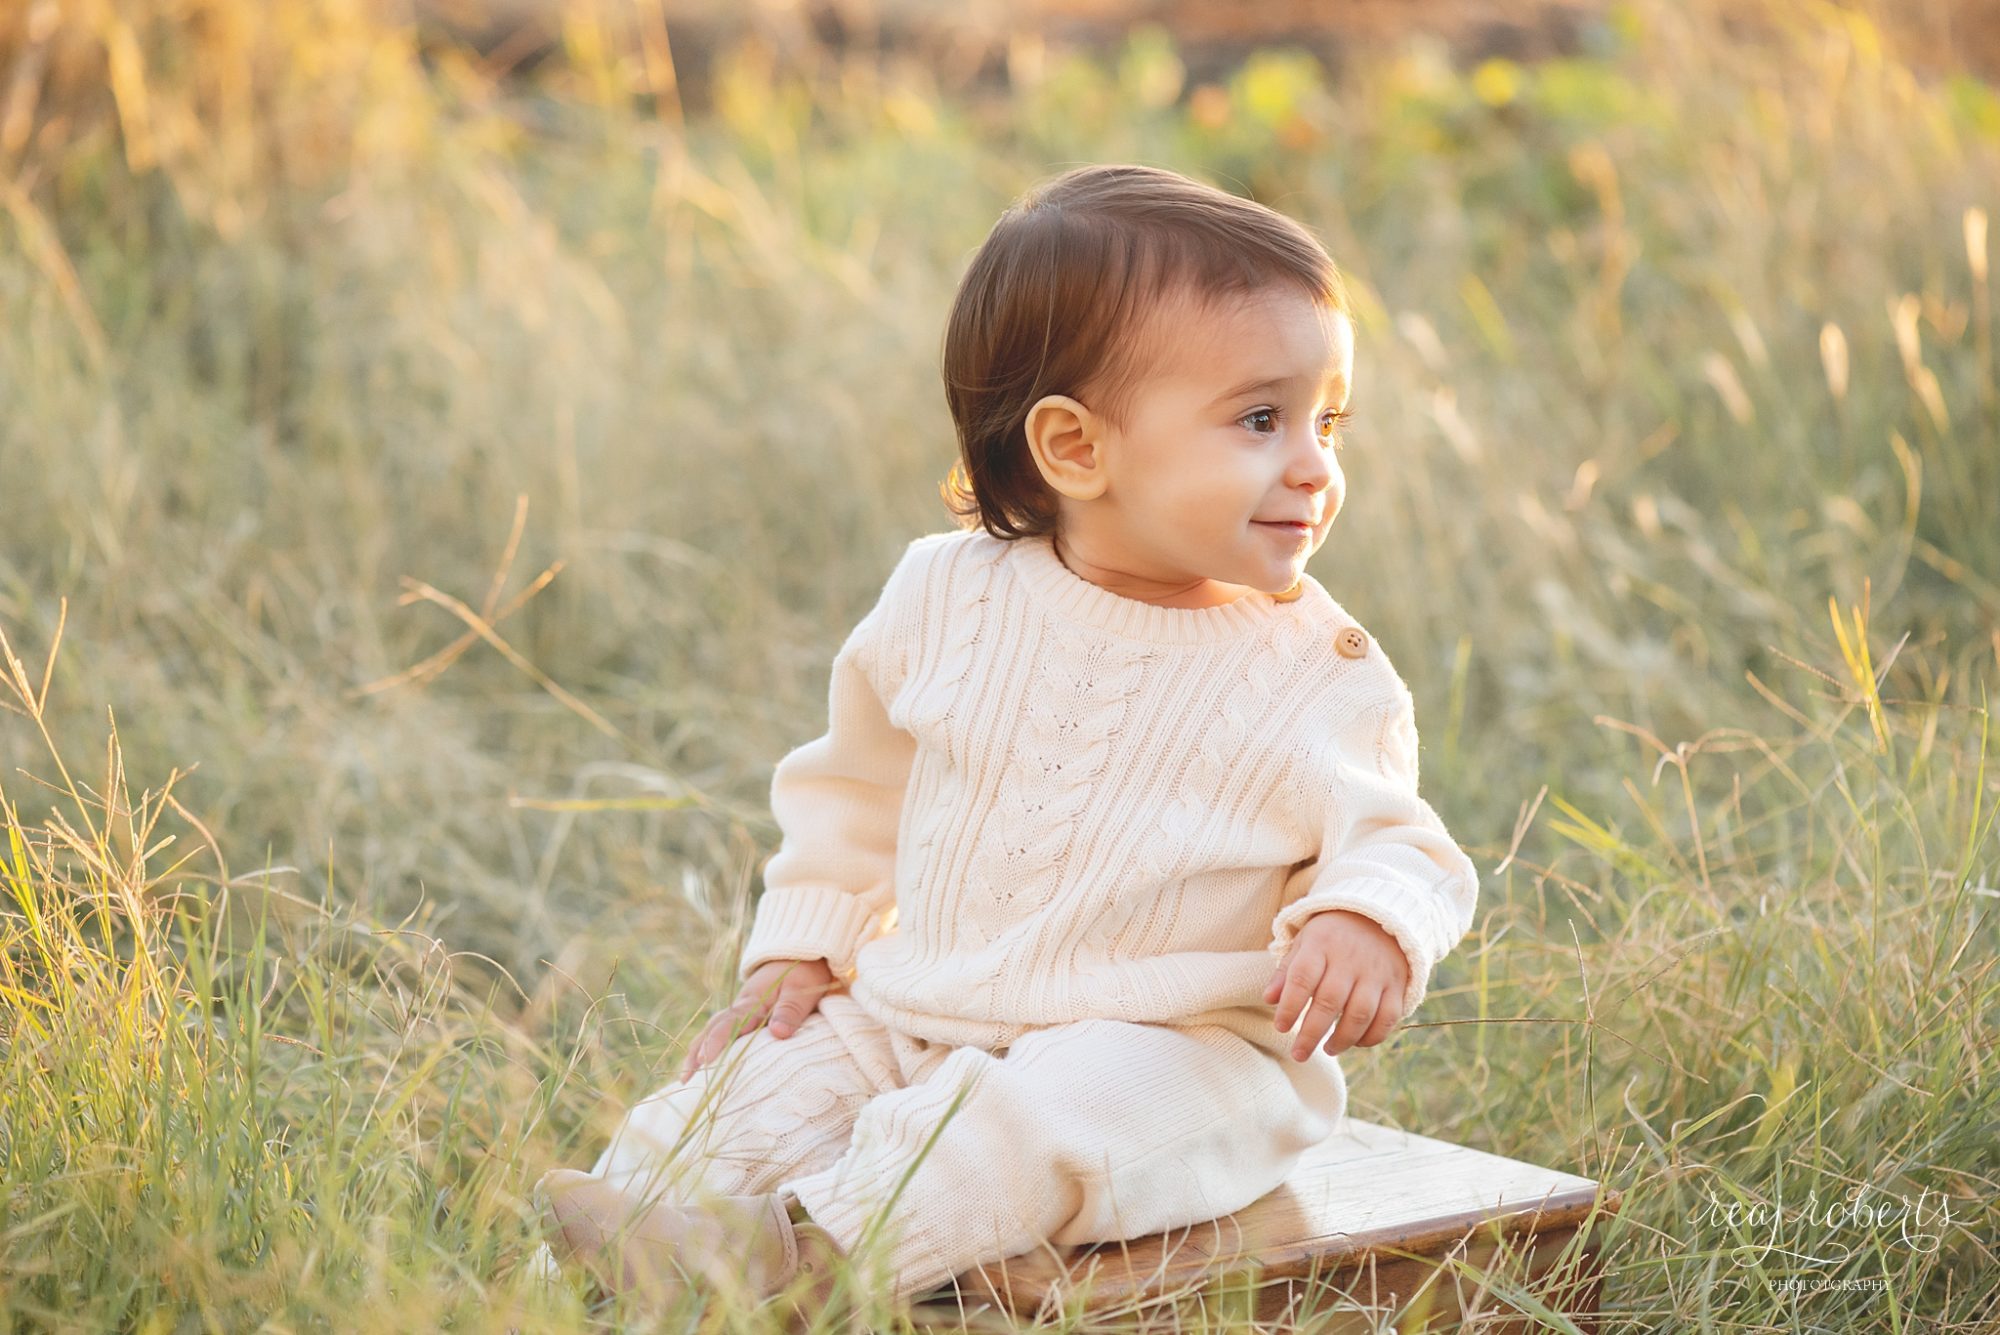 Cream cable knit romper gender neutral baby clothing, baby boy smiling in tall grass field | Chandler Family Photographer | Reaj Roberts Photography